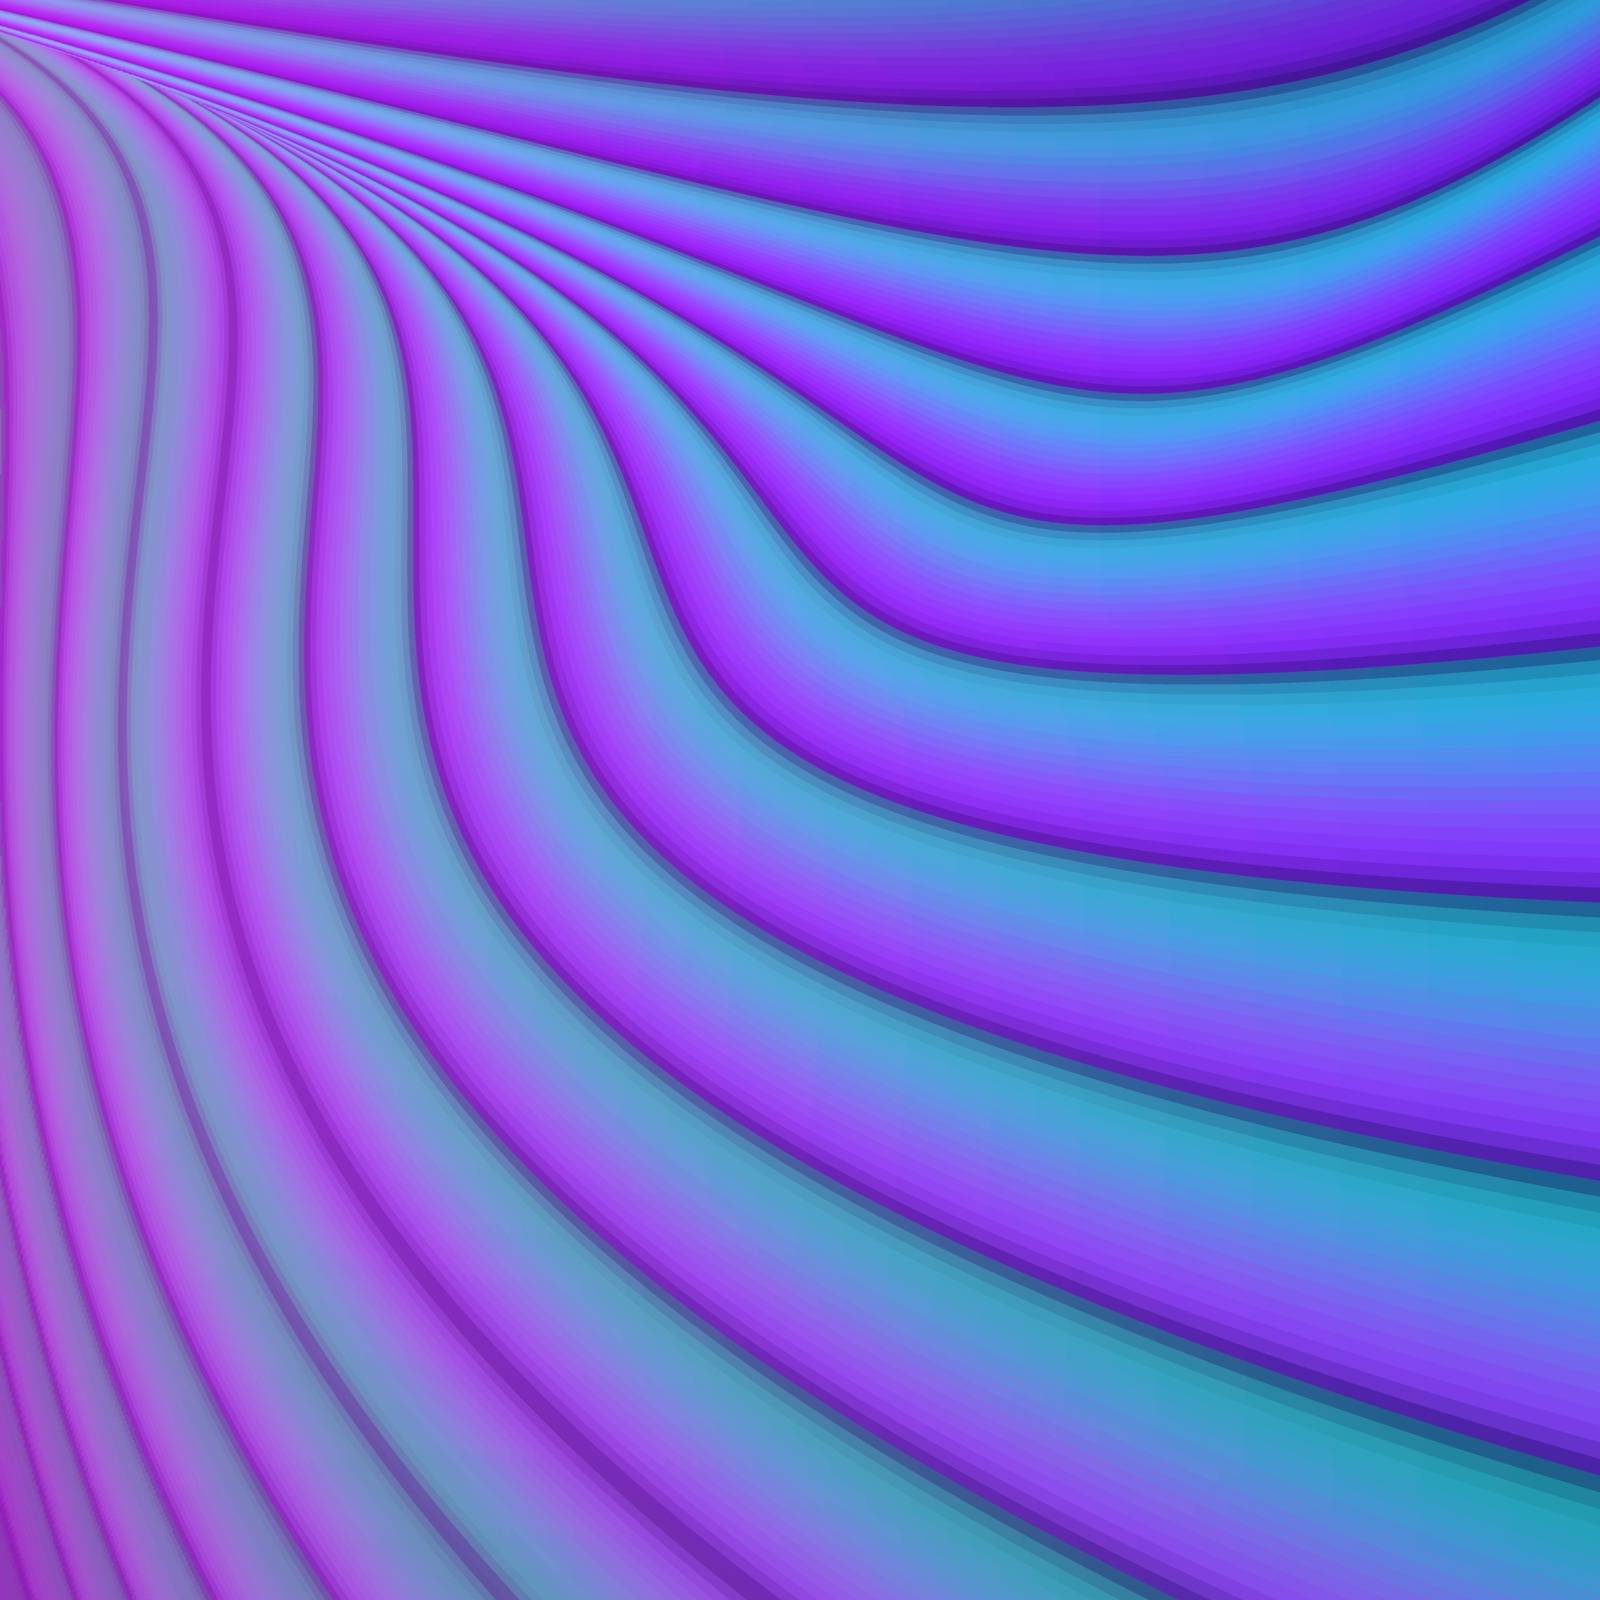 Wavy abstract background by Vectorydraw